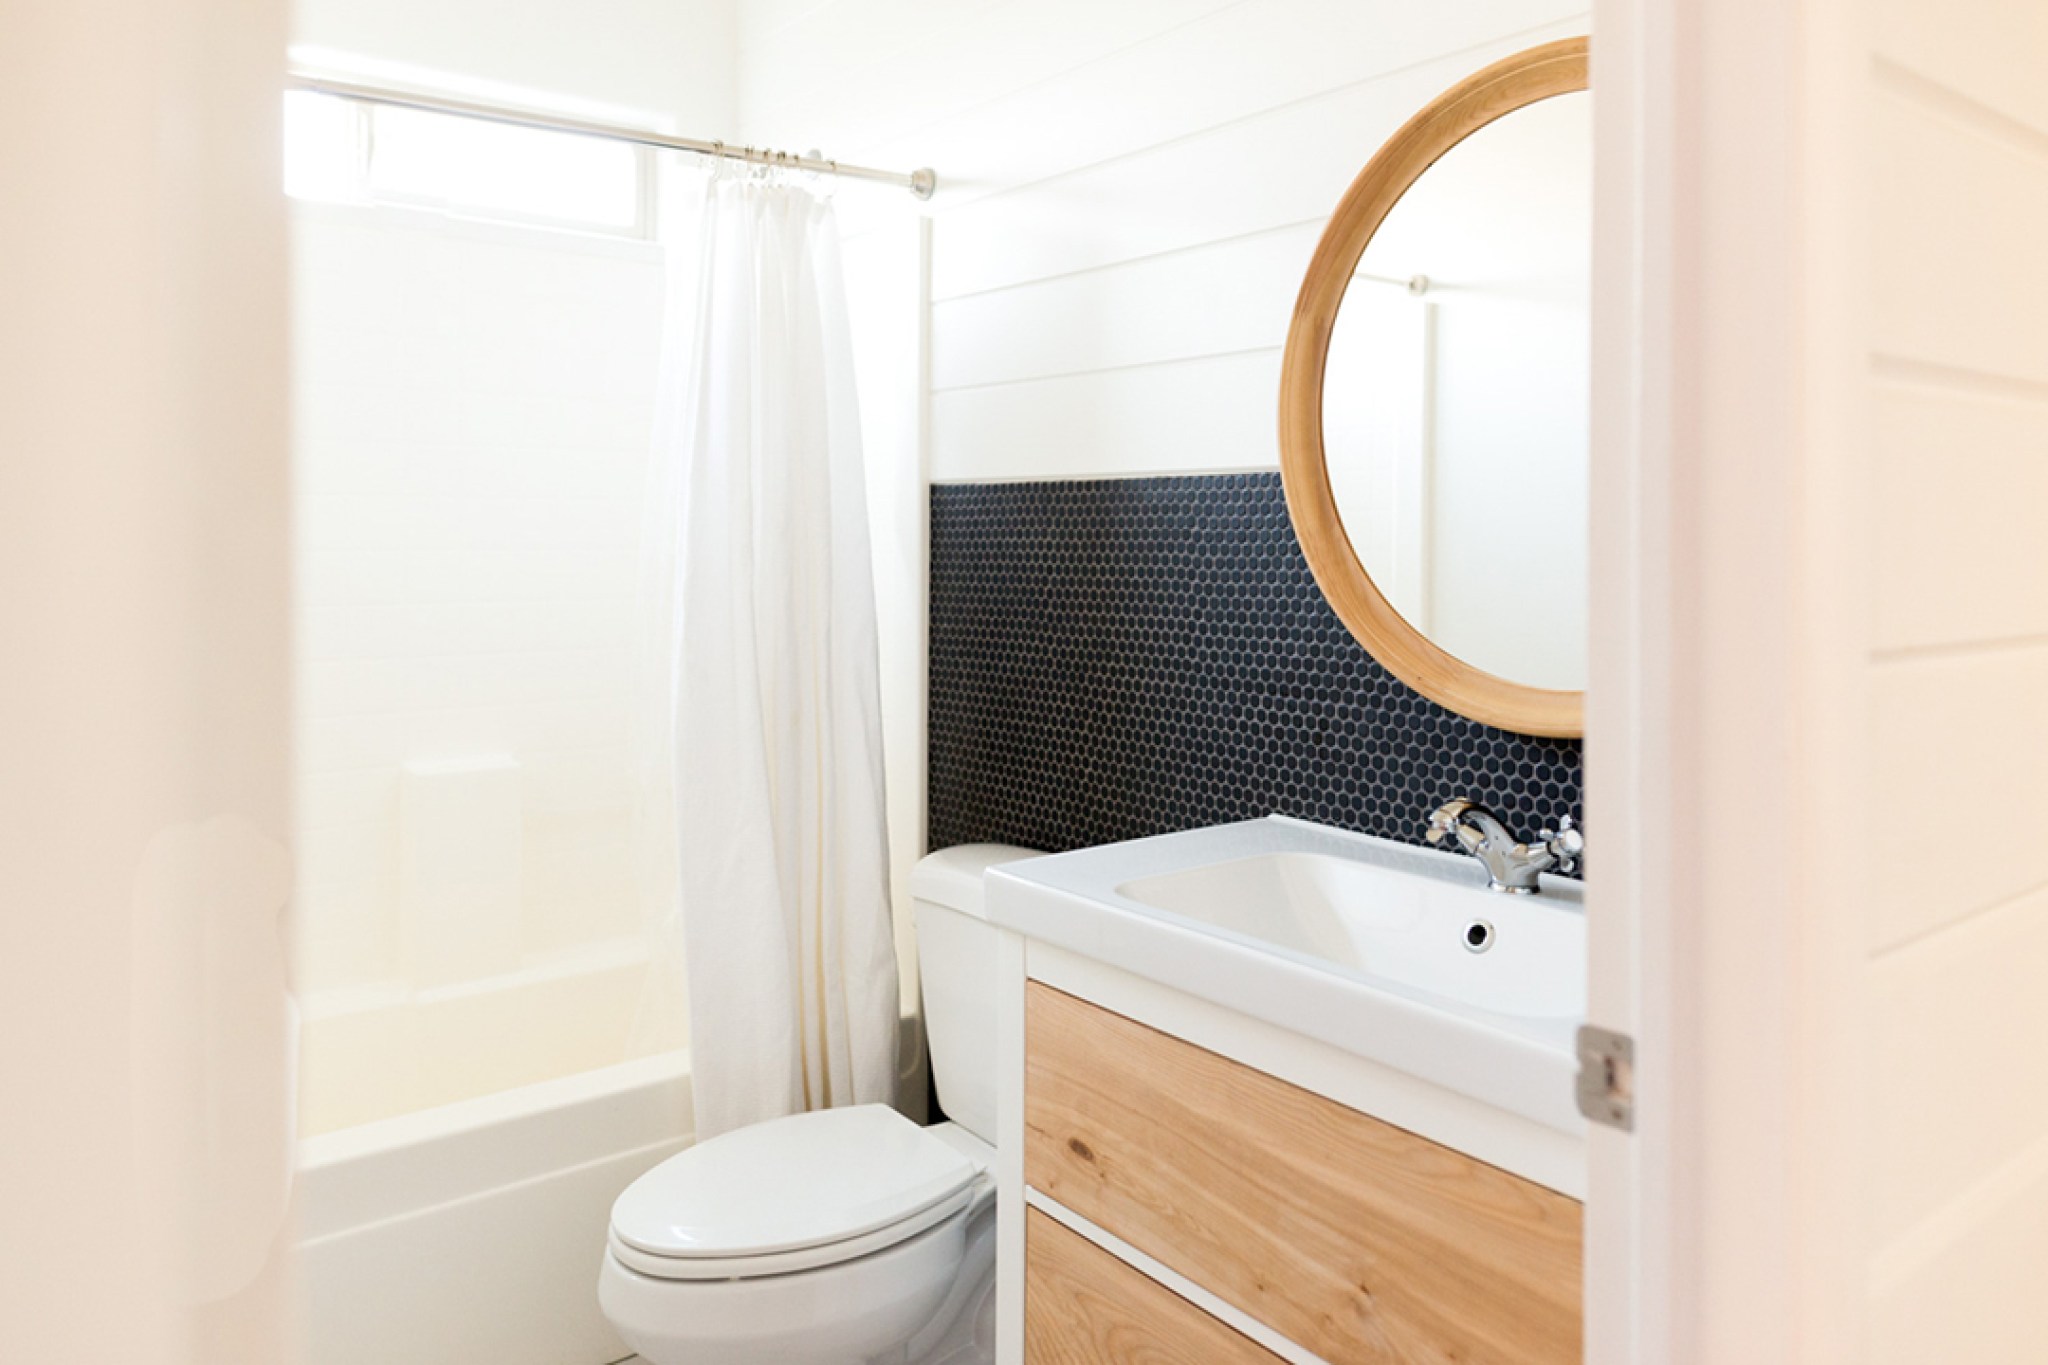 A white bathroom with black tile and natural wood accents